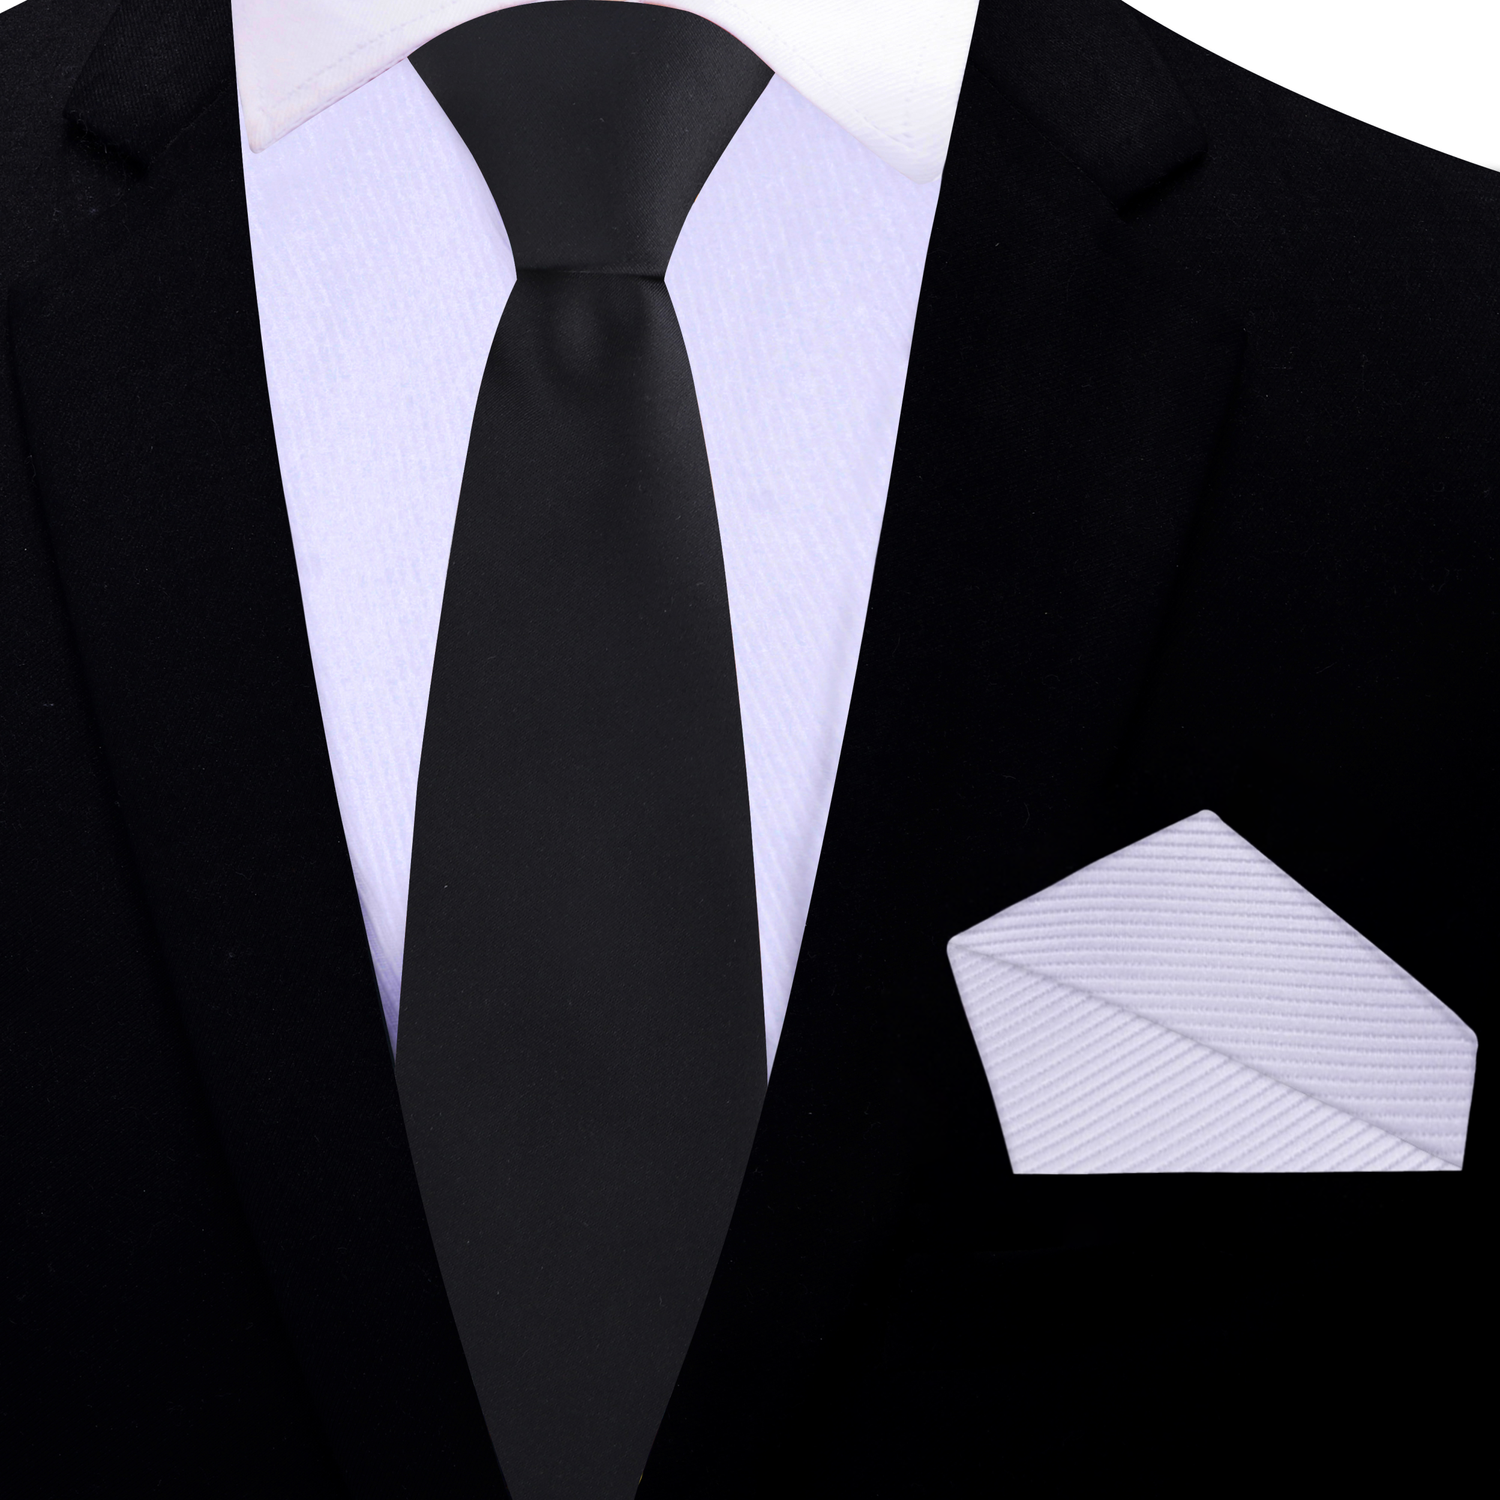 Thin Tie: Black Necktie with Solid White Pocket Square on Black Suit